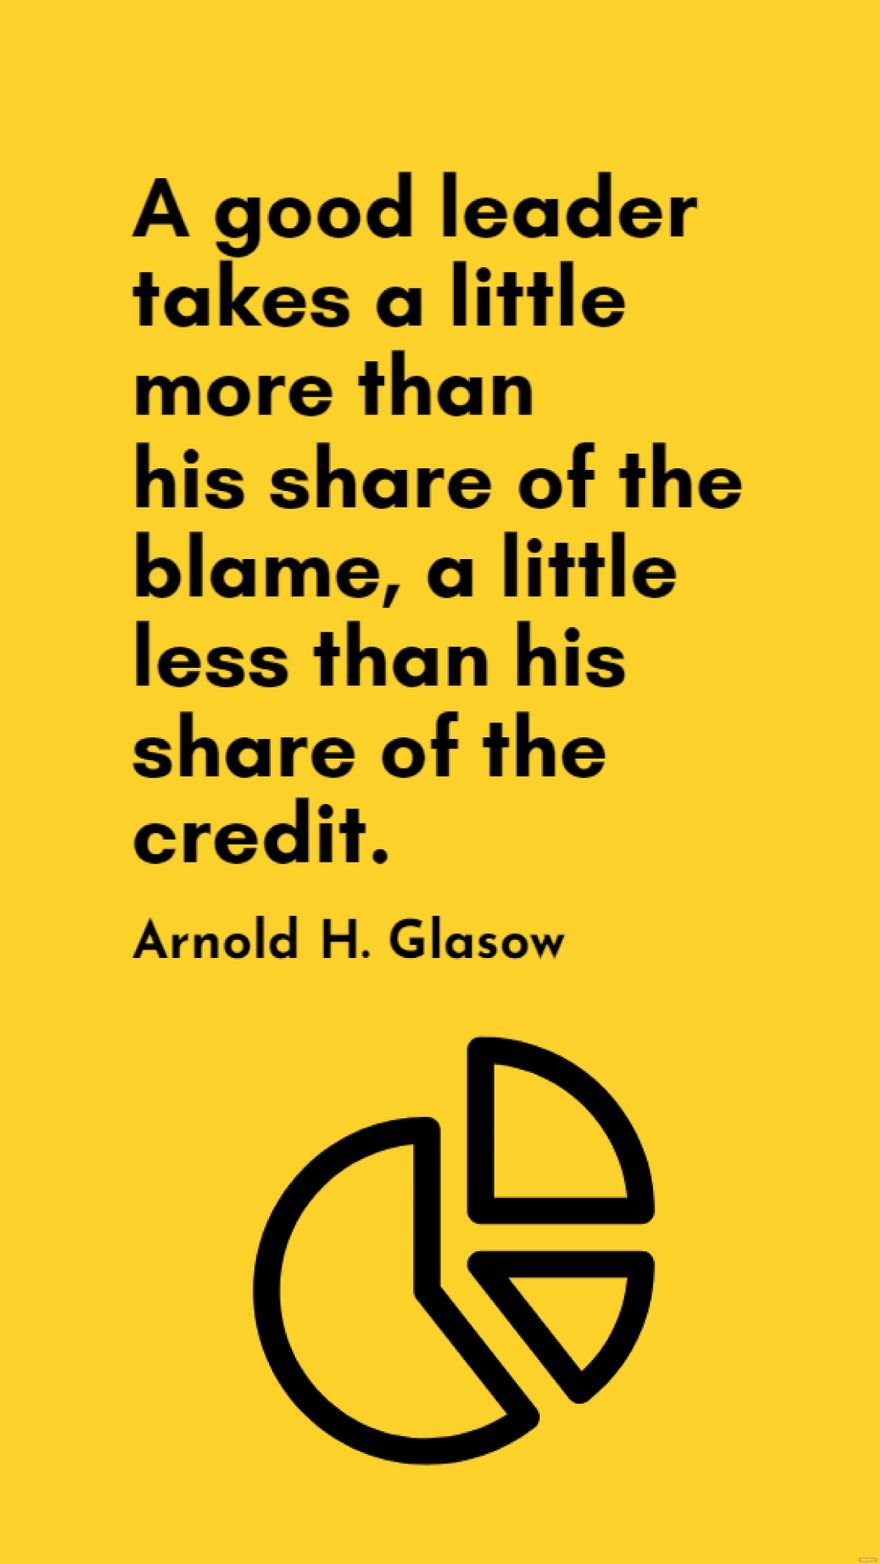 Arnold H. Glasow - A good leader takes a little more than his share of the blame, a little less than his share of the credit.